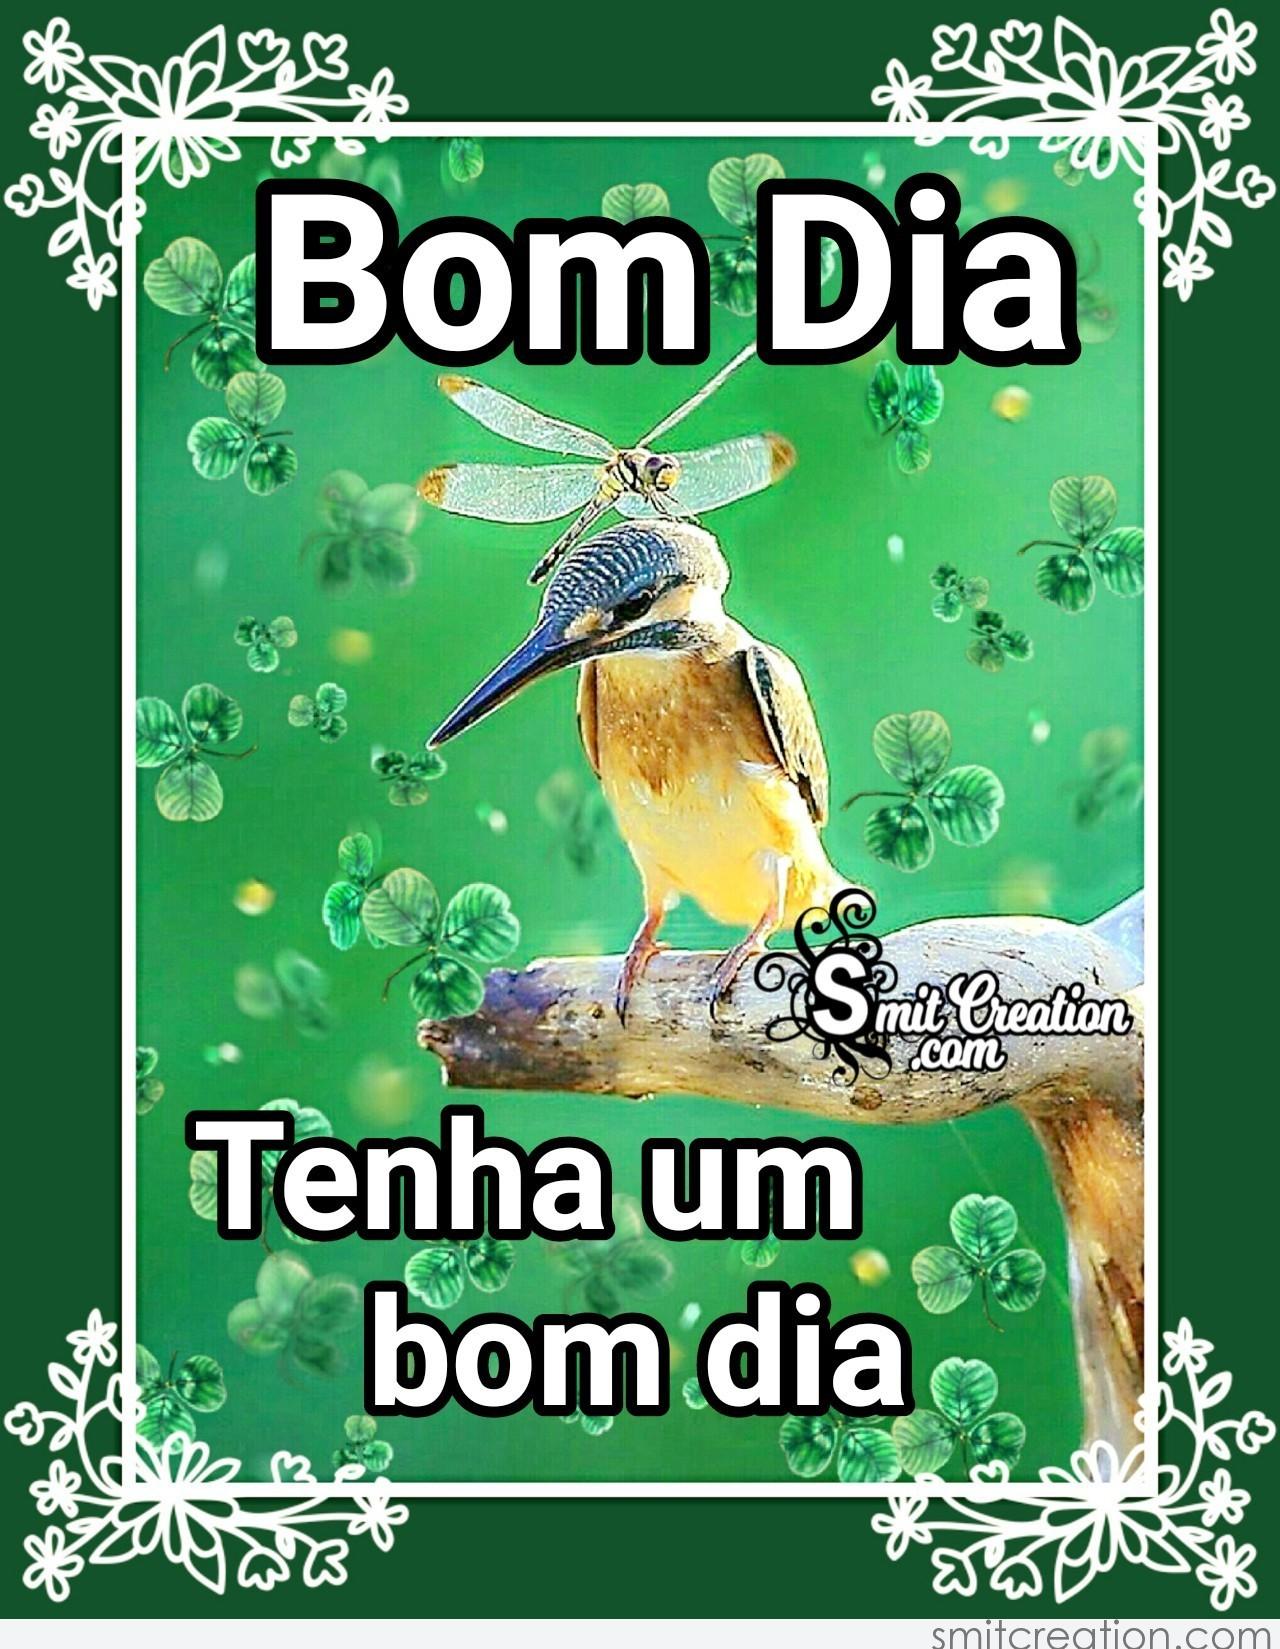 17 Bom dia – Portuguese - Pictures and Graphics for different festivals